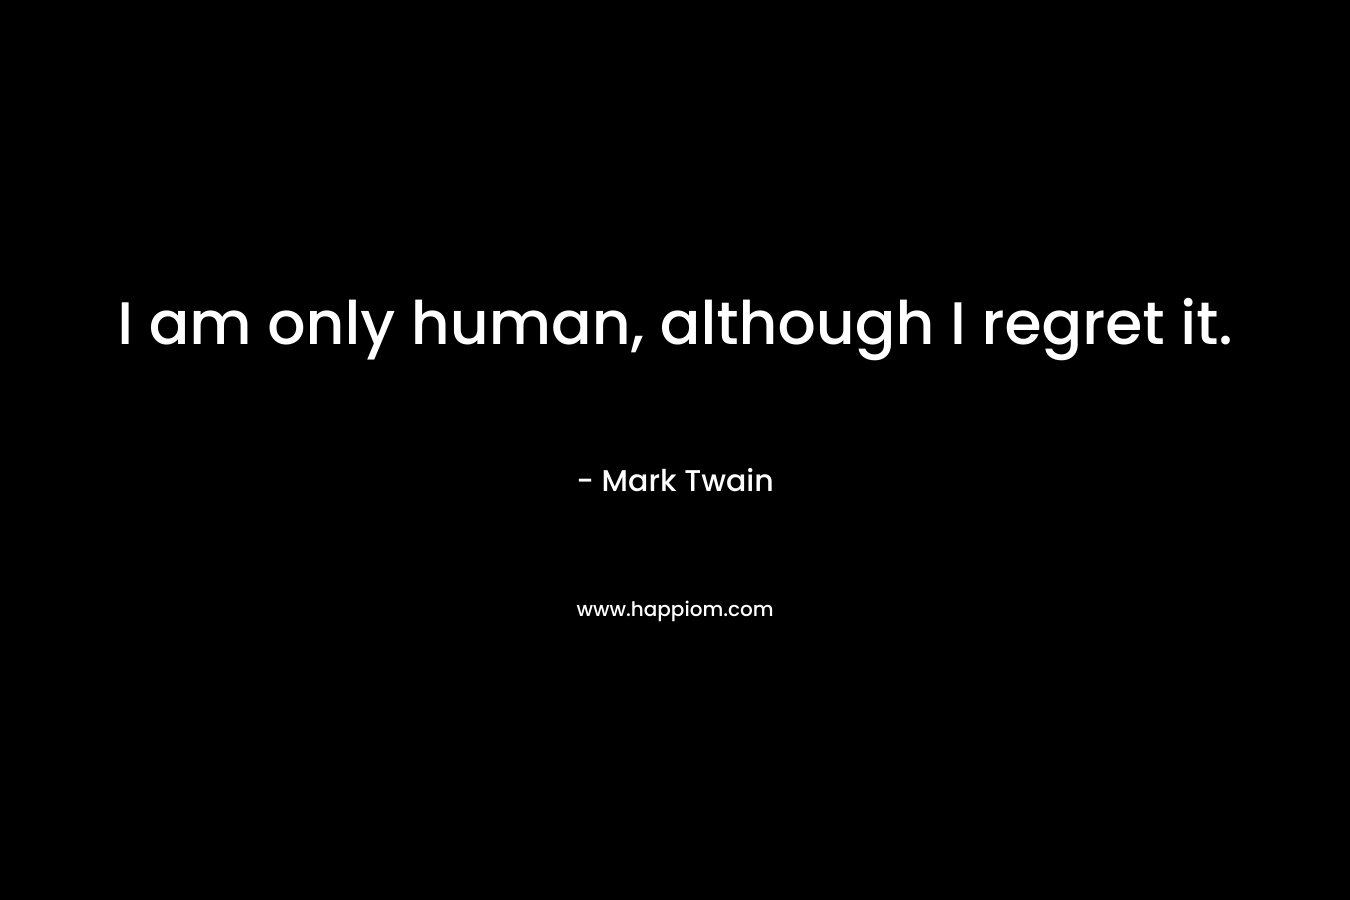 I am only human, although I regret it.